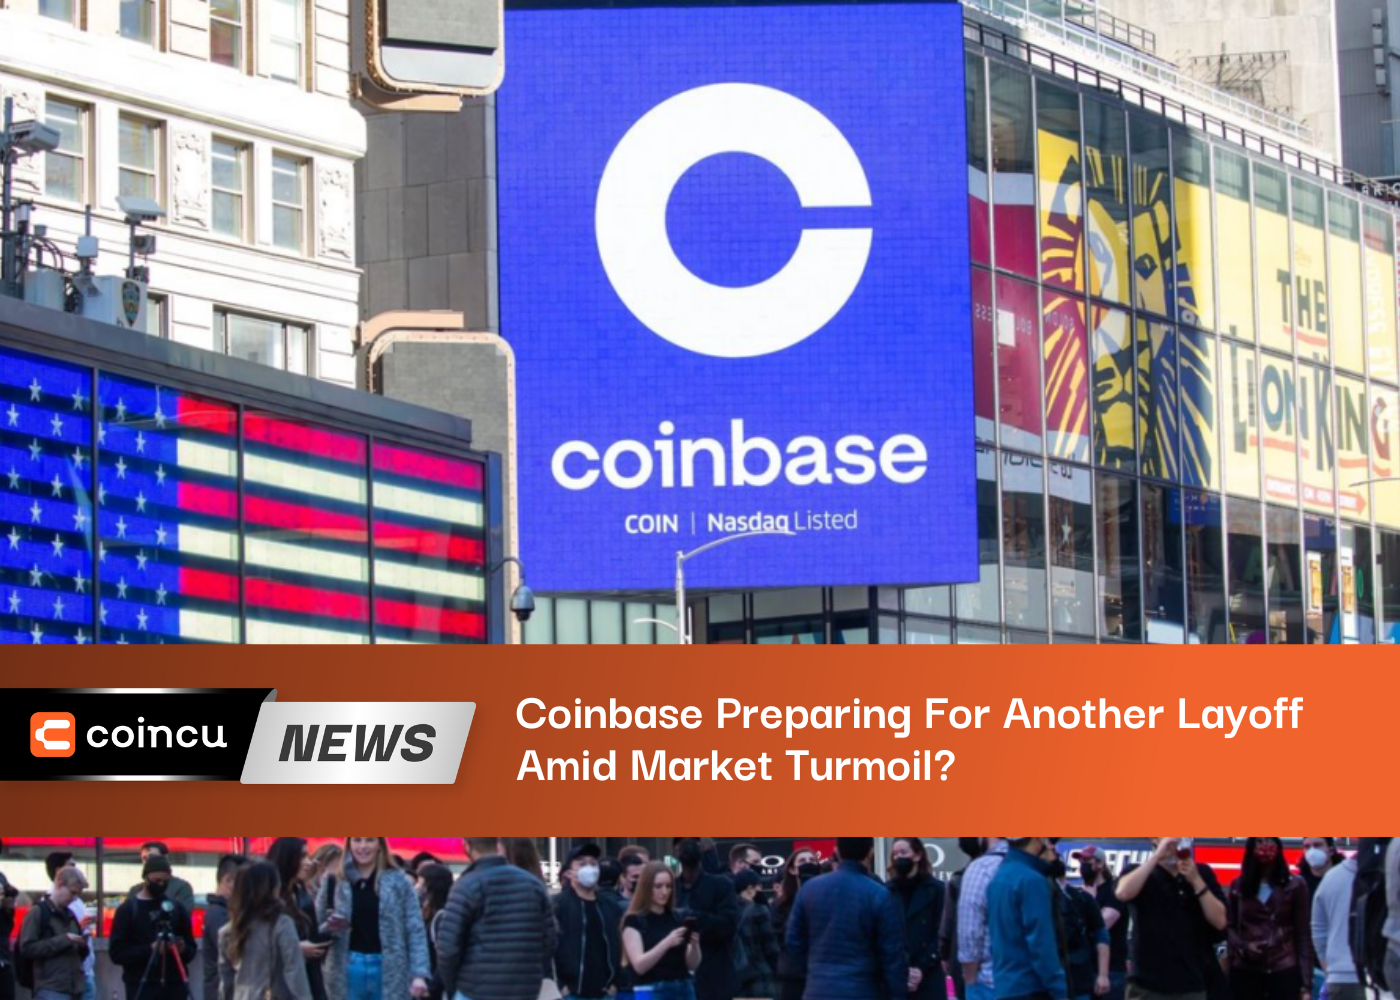 Coinbase Preparing For Another Layoff Amid Market Turmoil?